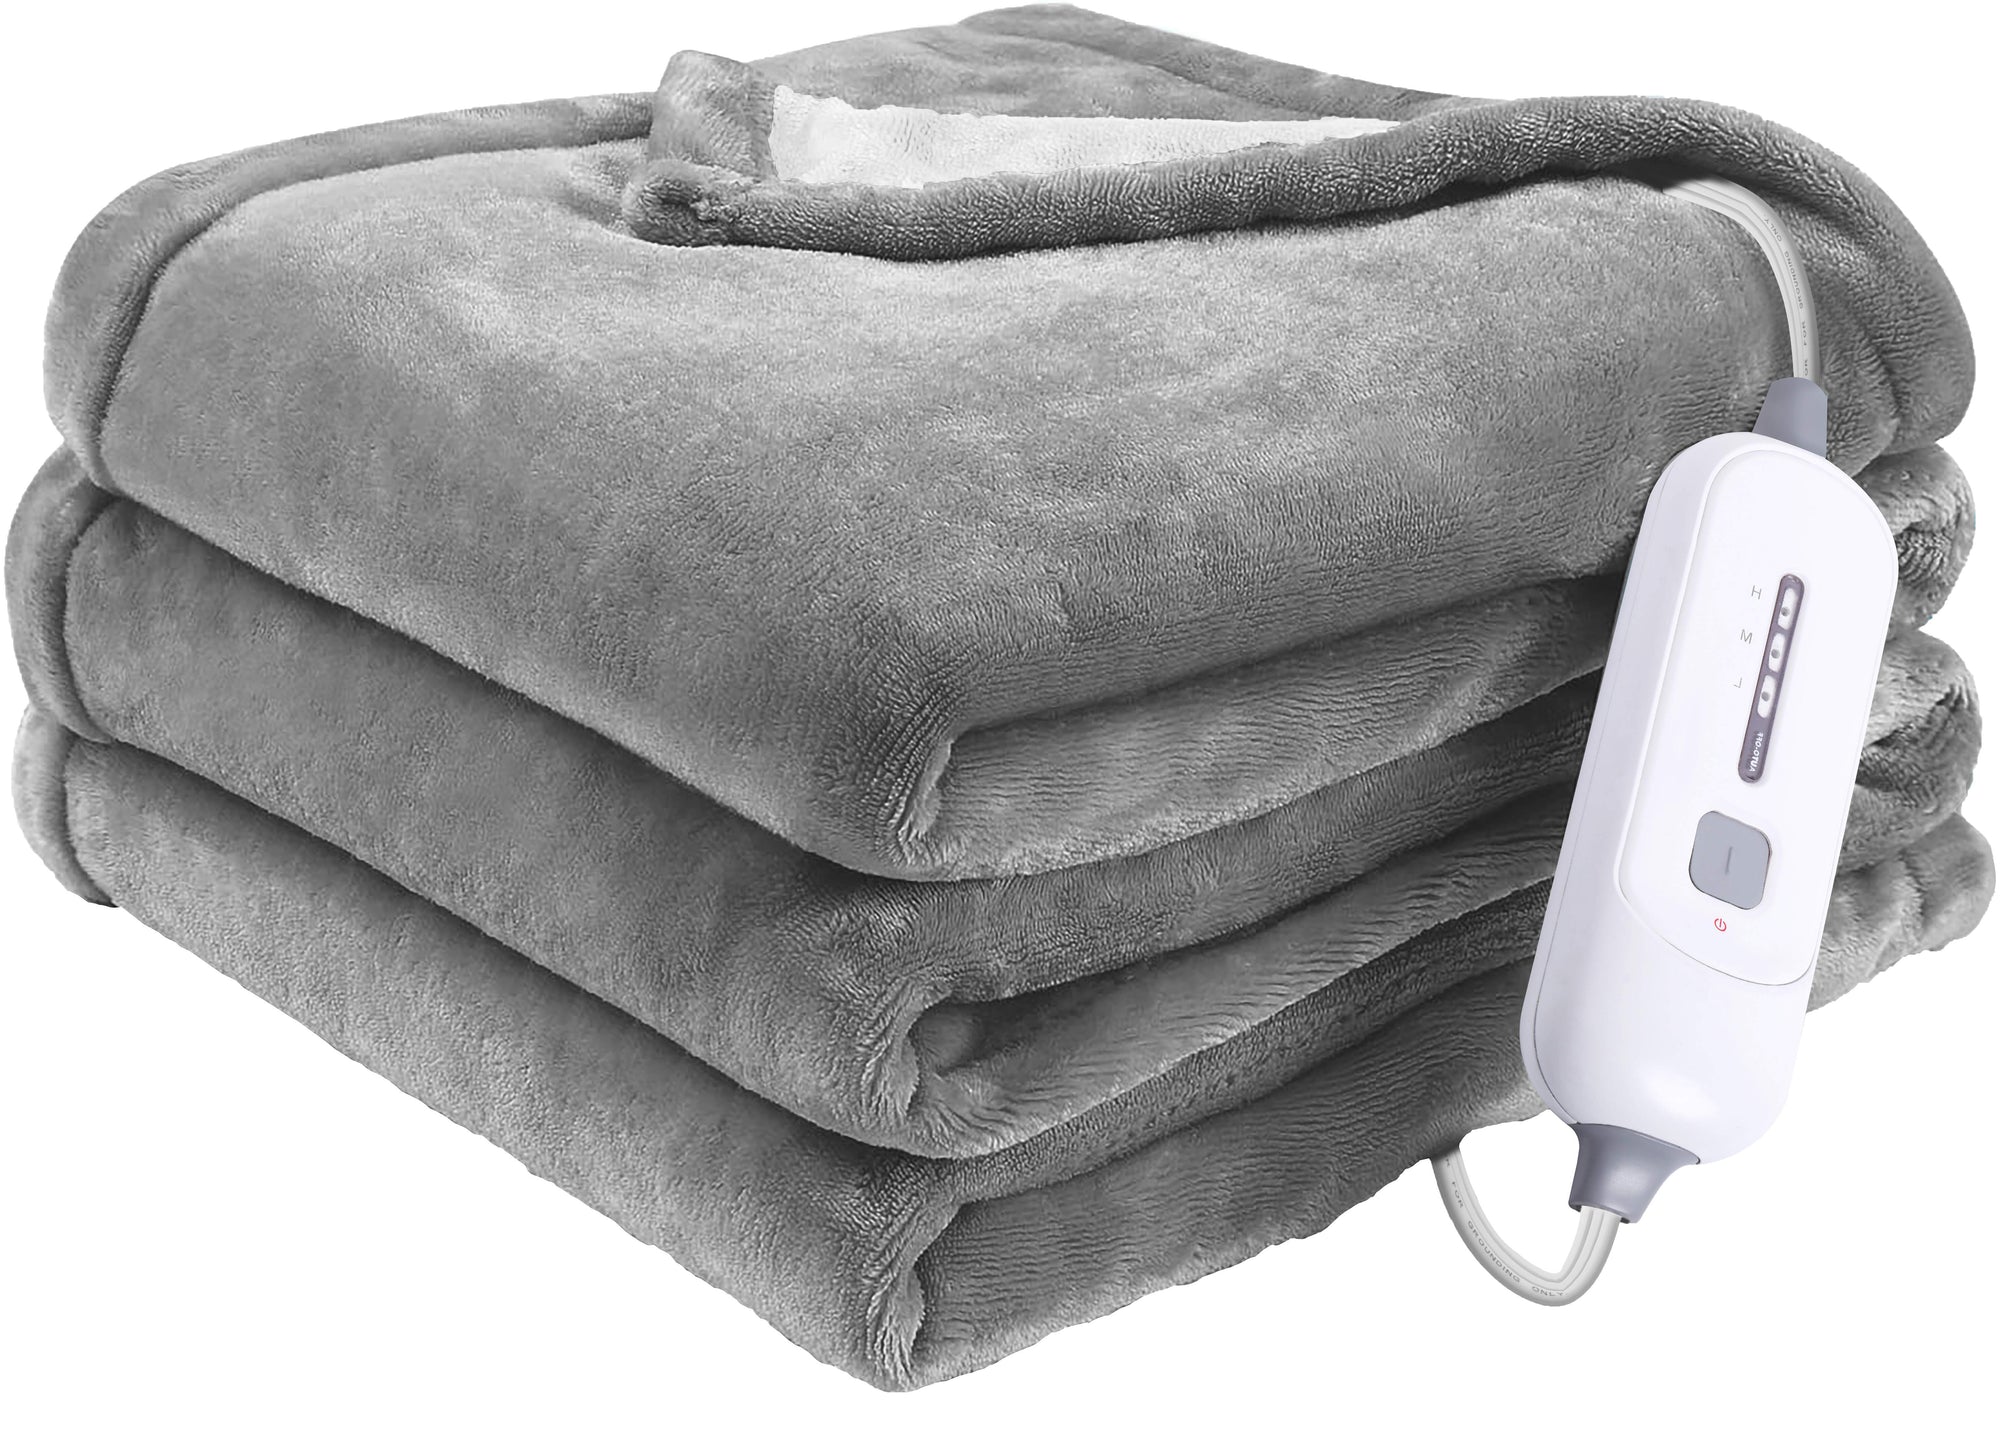 Shop Our Heated Blanket Gray 50"x60" On Amazon